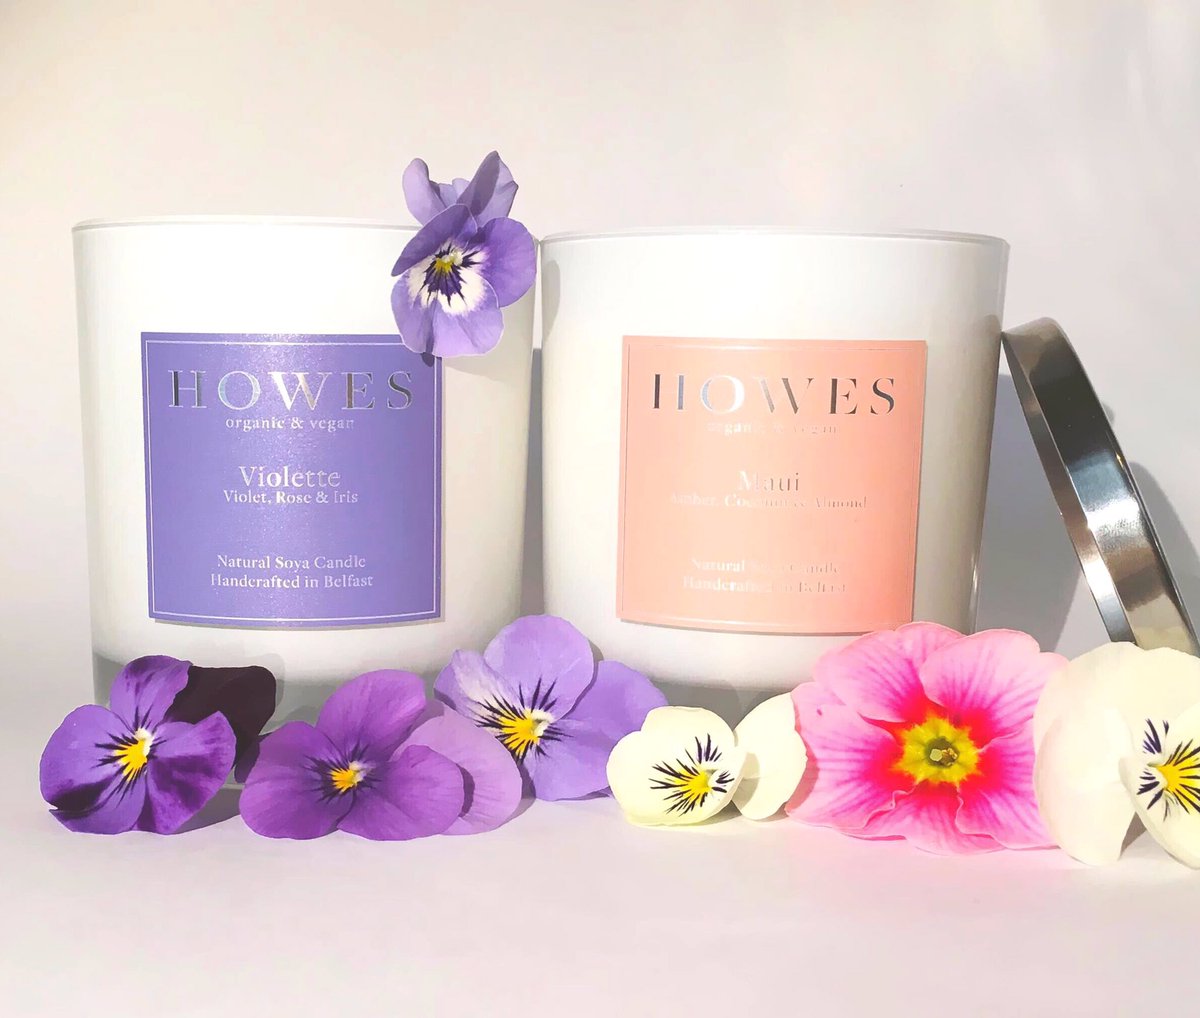 2 weeks until #MothersDay. Get your candles now while stocks last! #soyacandles #howes_ov #Maui #Violette #candle #handpoured #Belfast